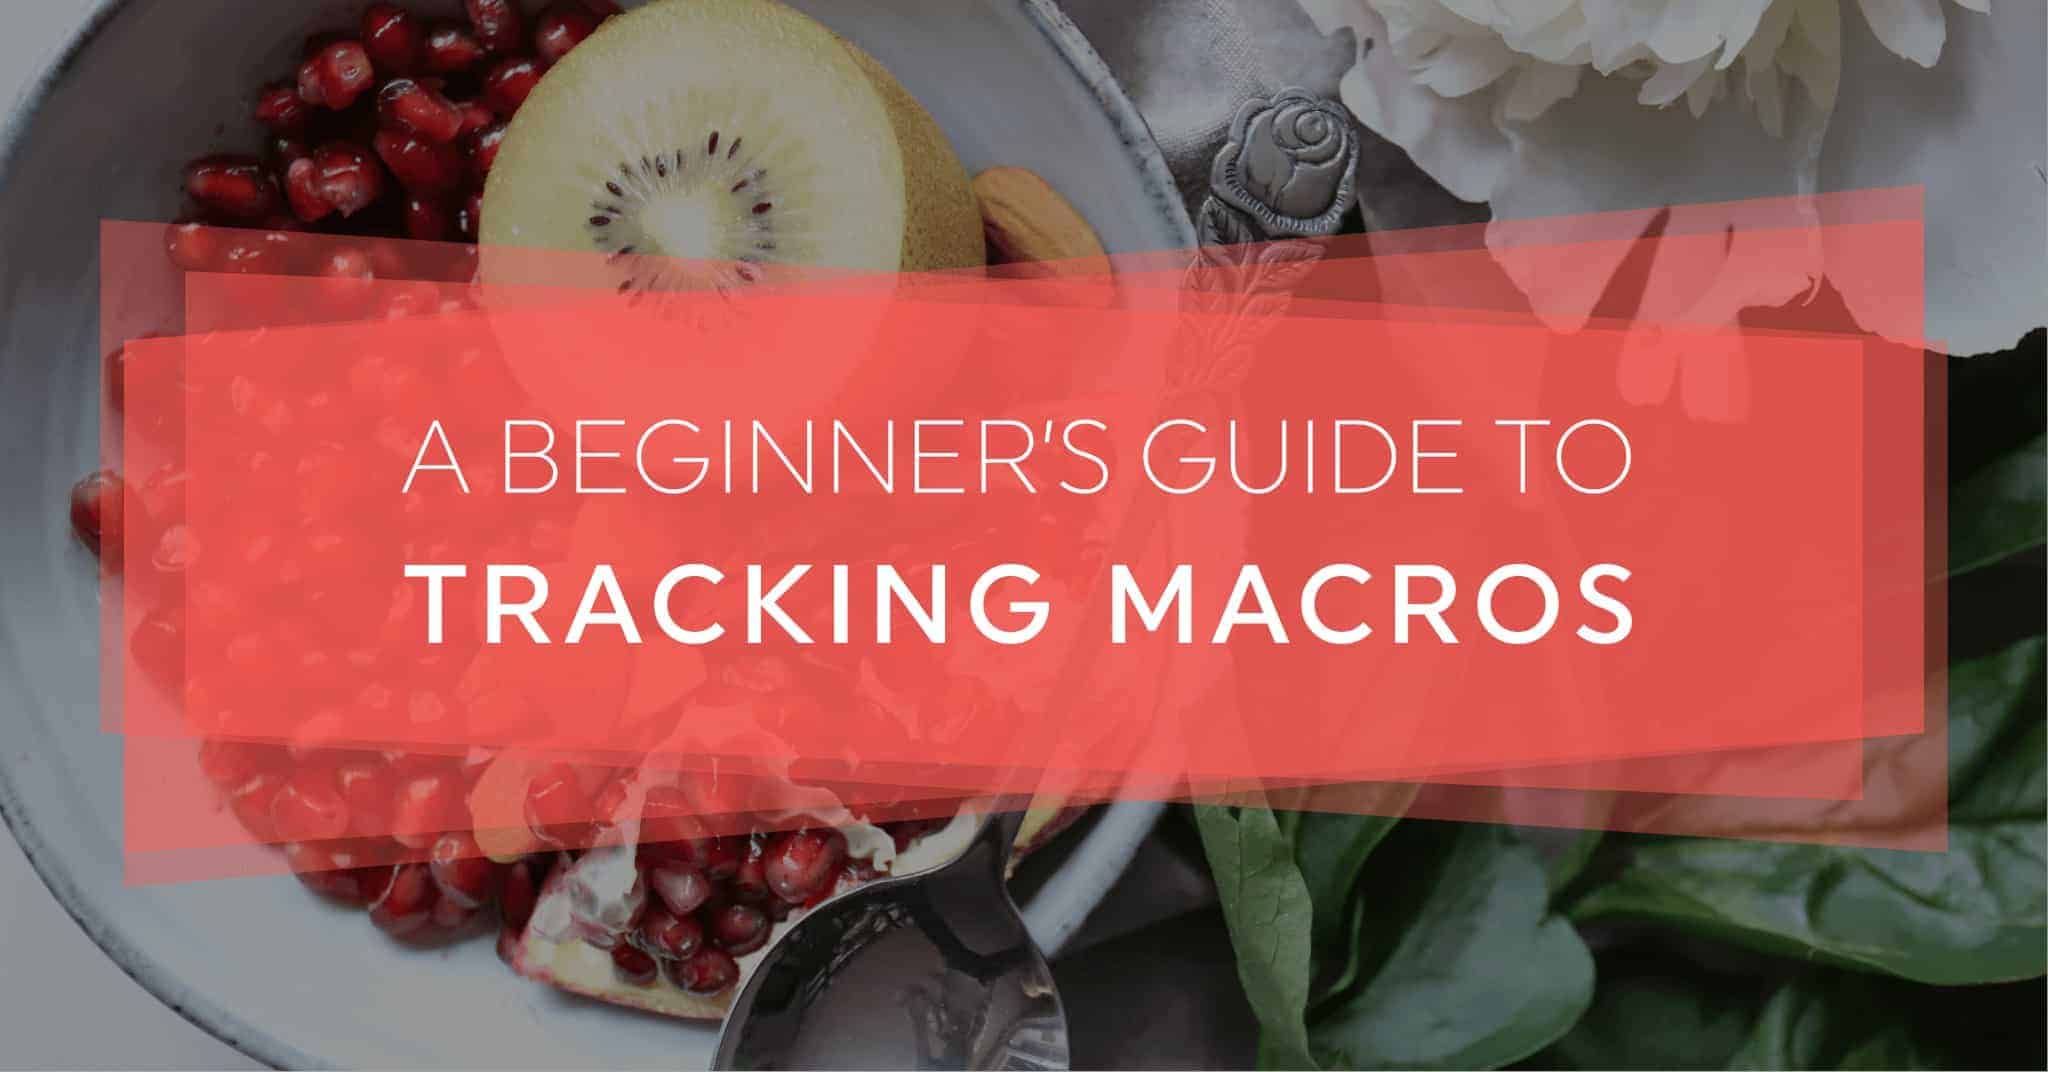 https://cdn.shpe.us/wp-content/uploads/sites/5/2016/12/a-beginner-s-guide-to-tracking-macros-01.jpg